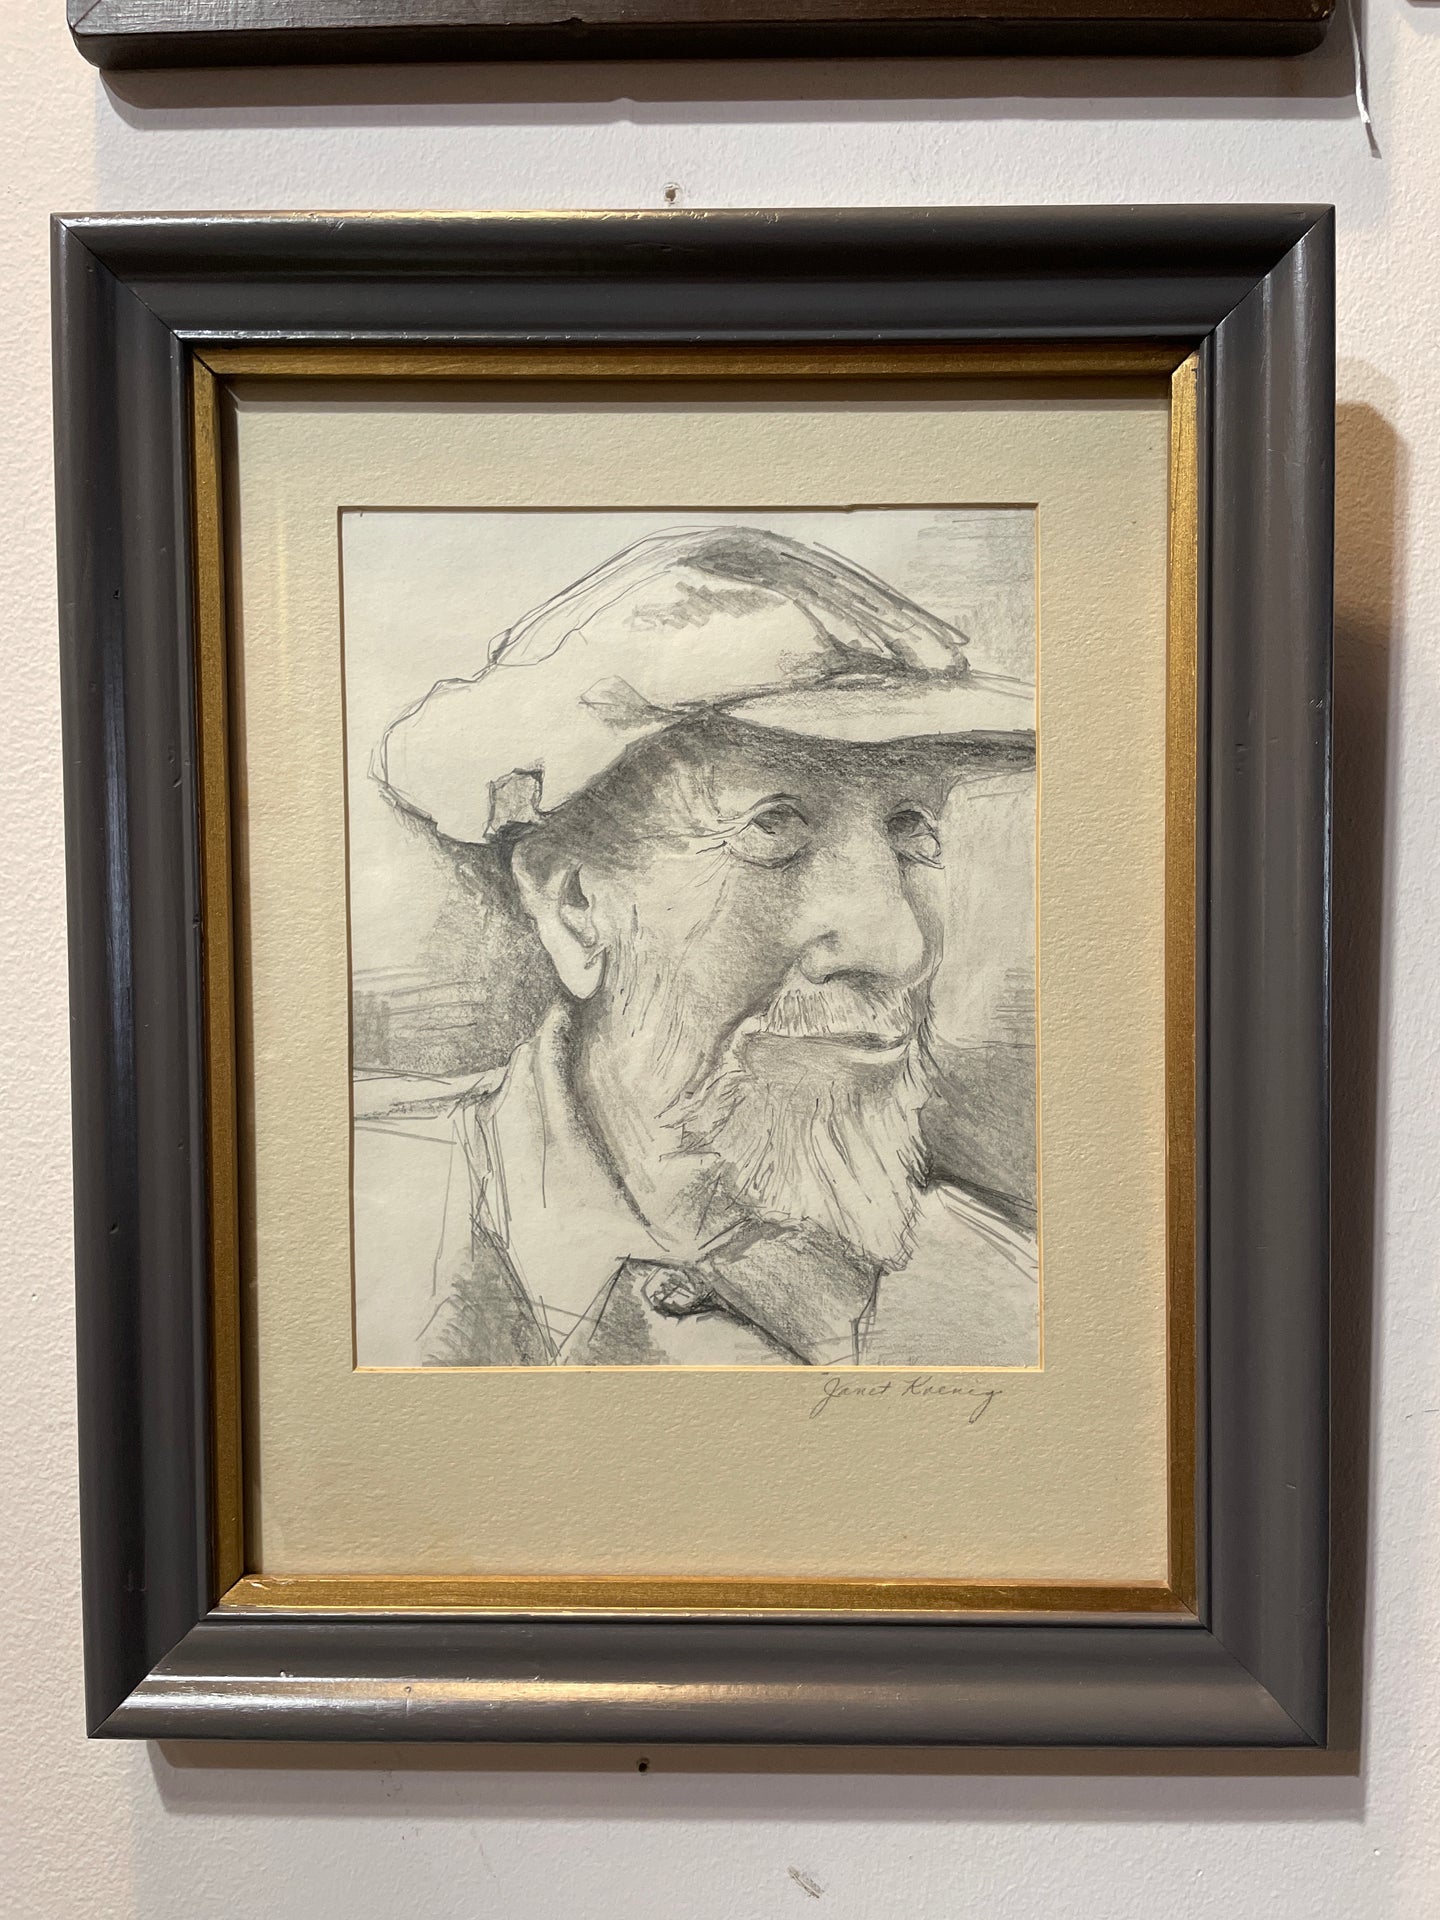 Pencil Sketch of Man with Goatee & Cap Signed